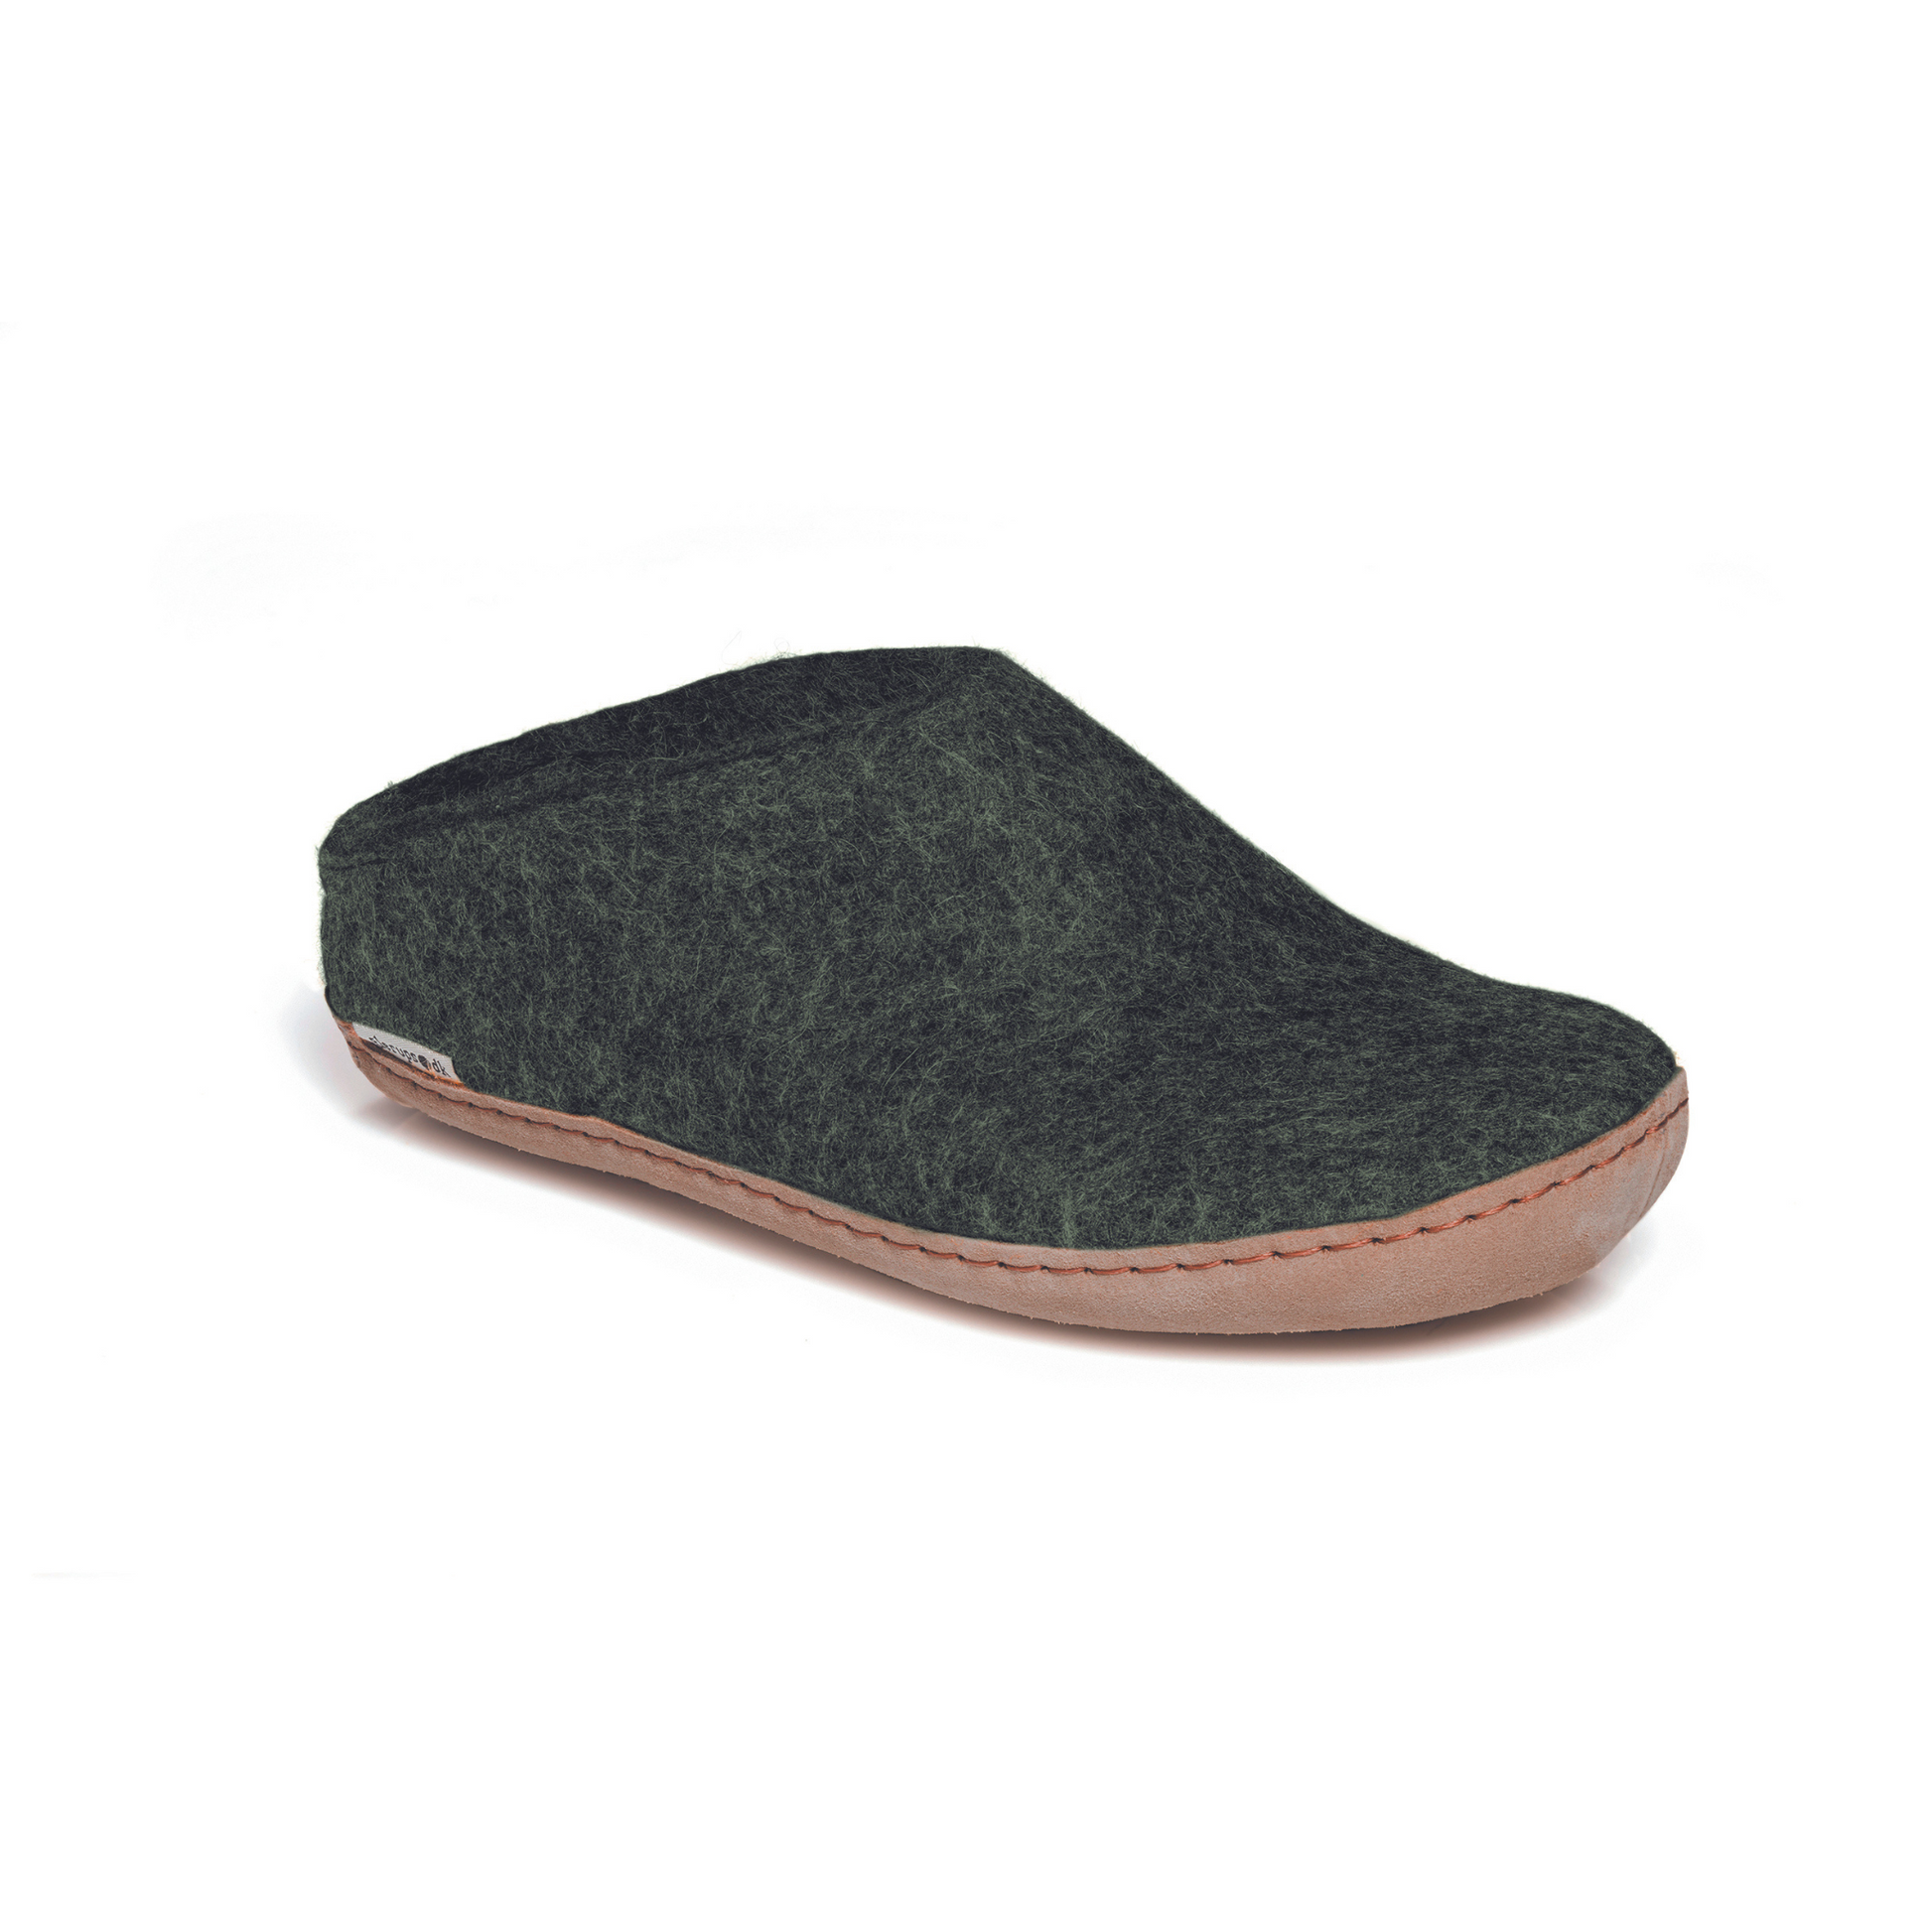 A felted dark green slipper pictured at a slight angle, showing part of the top front and side of the slipper. A tan leather sole lines the bottom of the shoe with a row of stitching.